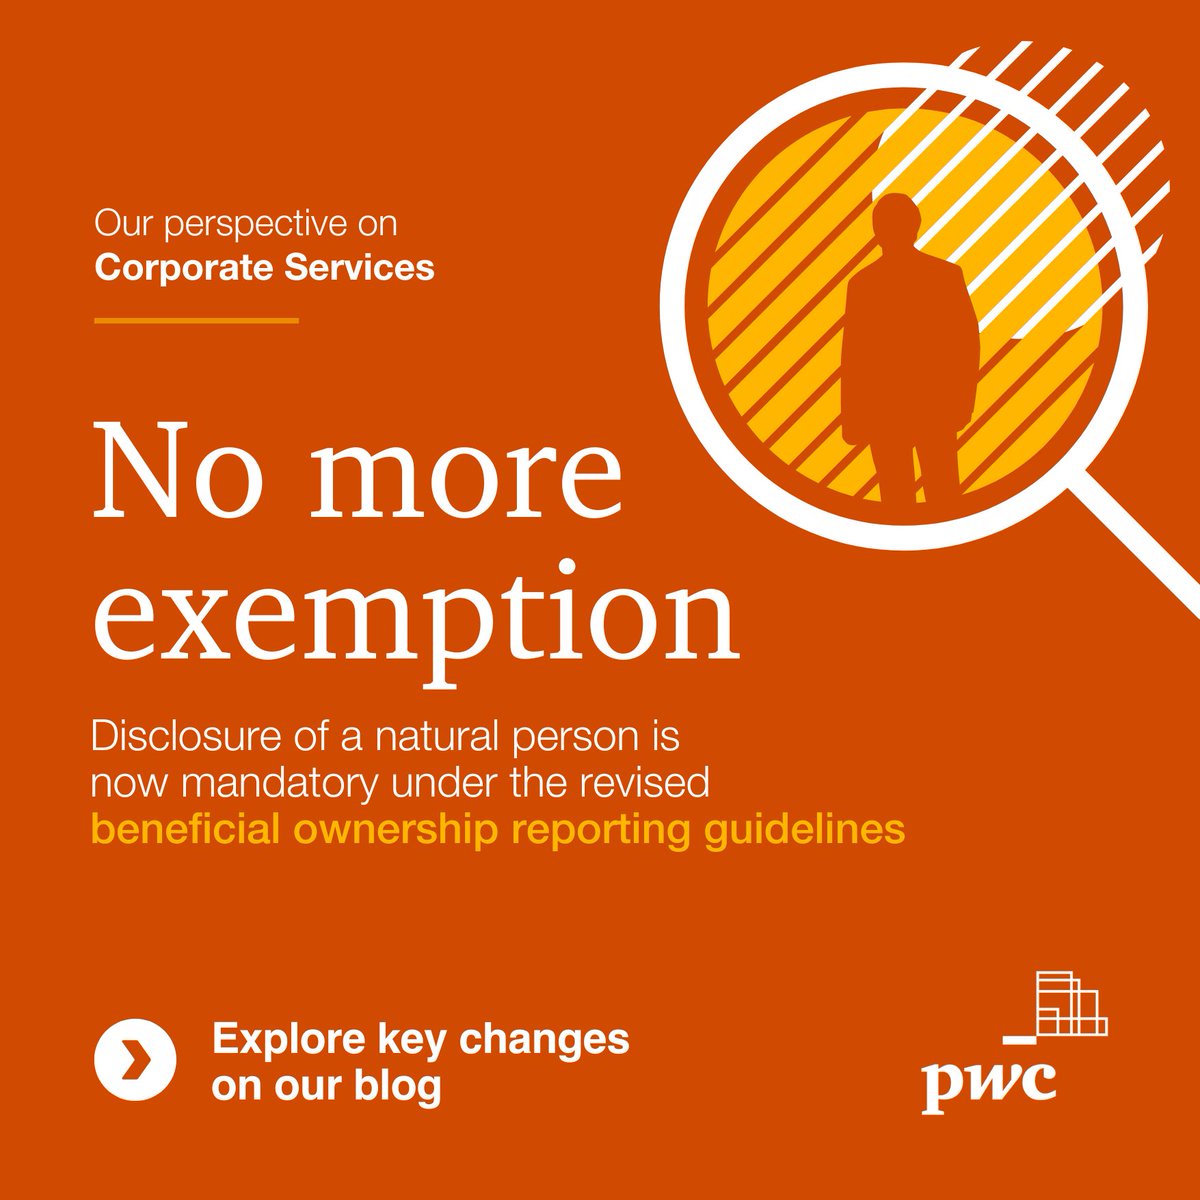 Confused by the new changes to Beneficial Ownership (BO) guidelines by SSM? Our Corporate Services team unpacks it for you — stay informed about how these clarifications and broadened responsibilities might impact your business: pwc.to/3UcXWWw #Compliance